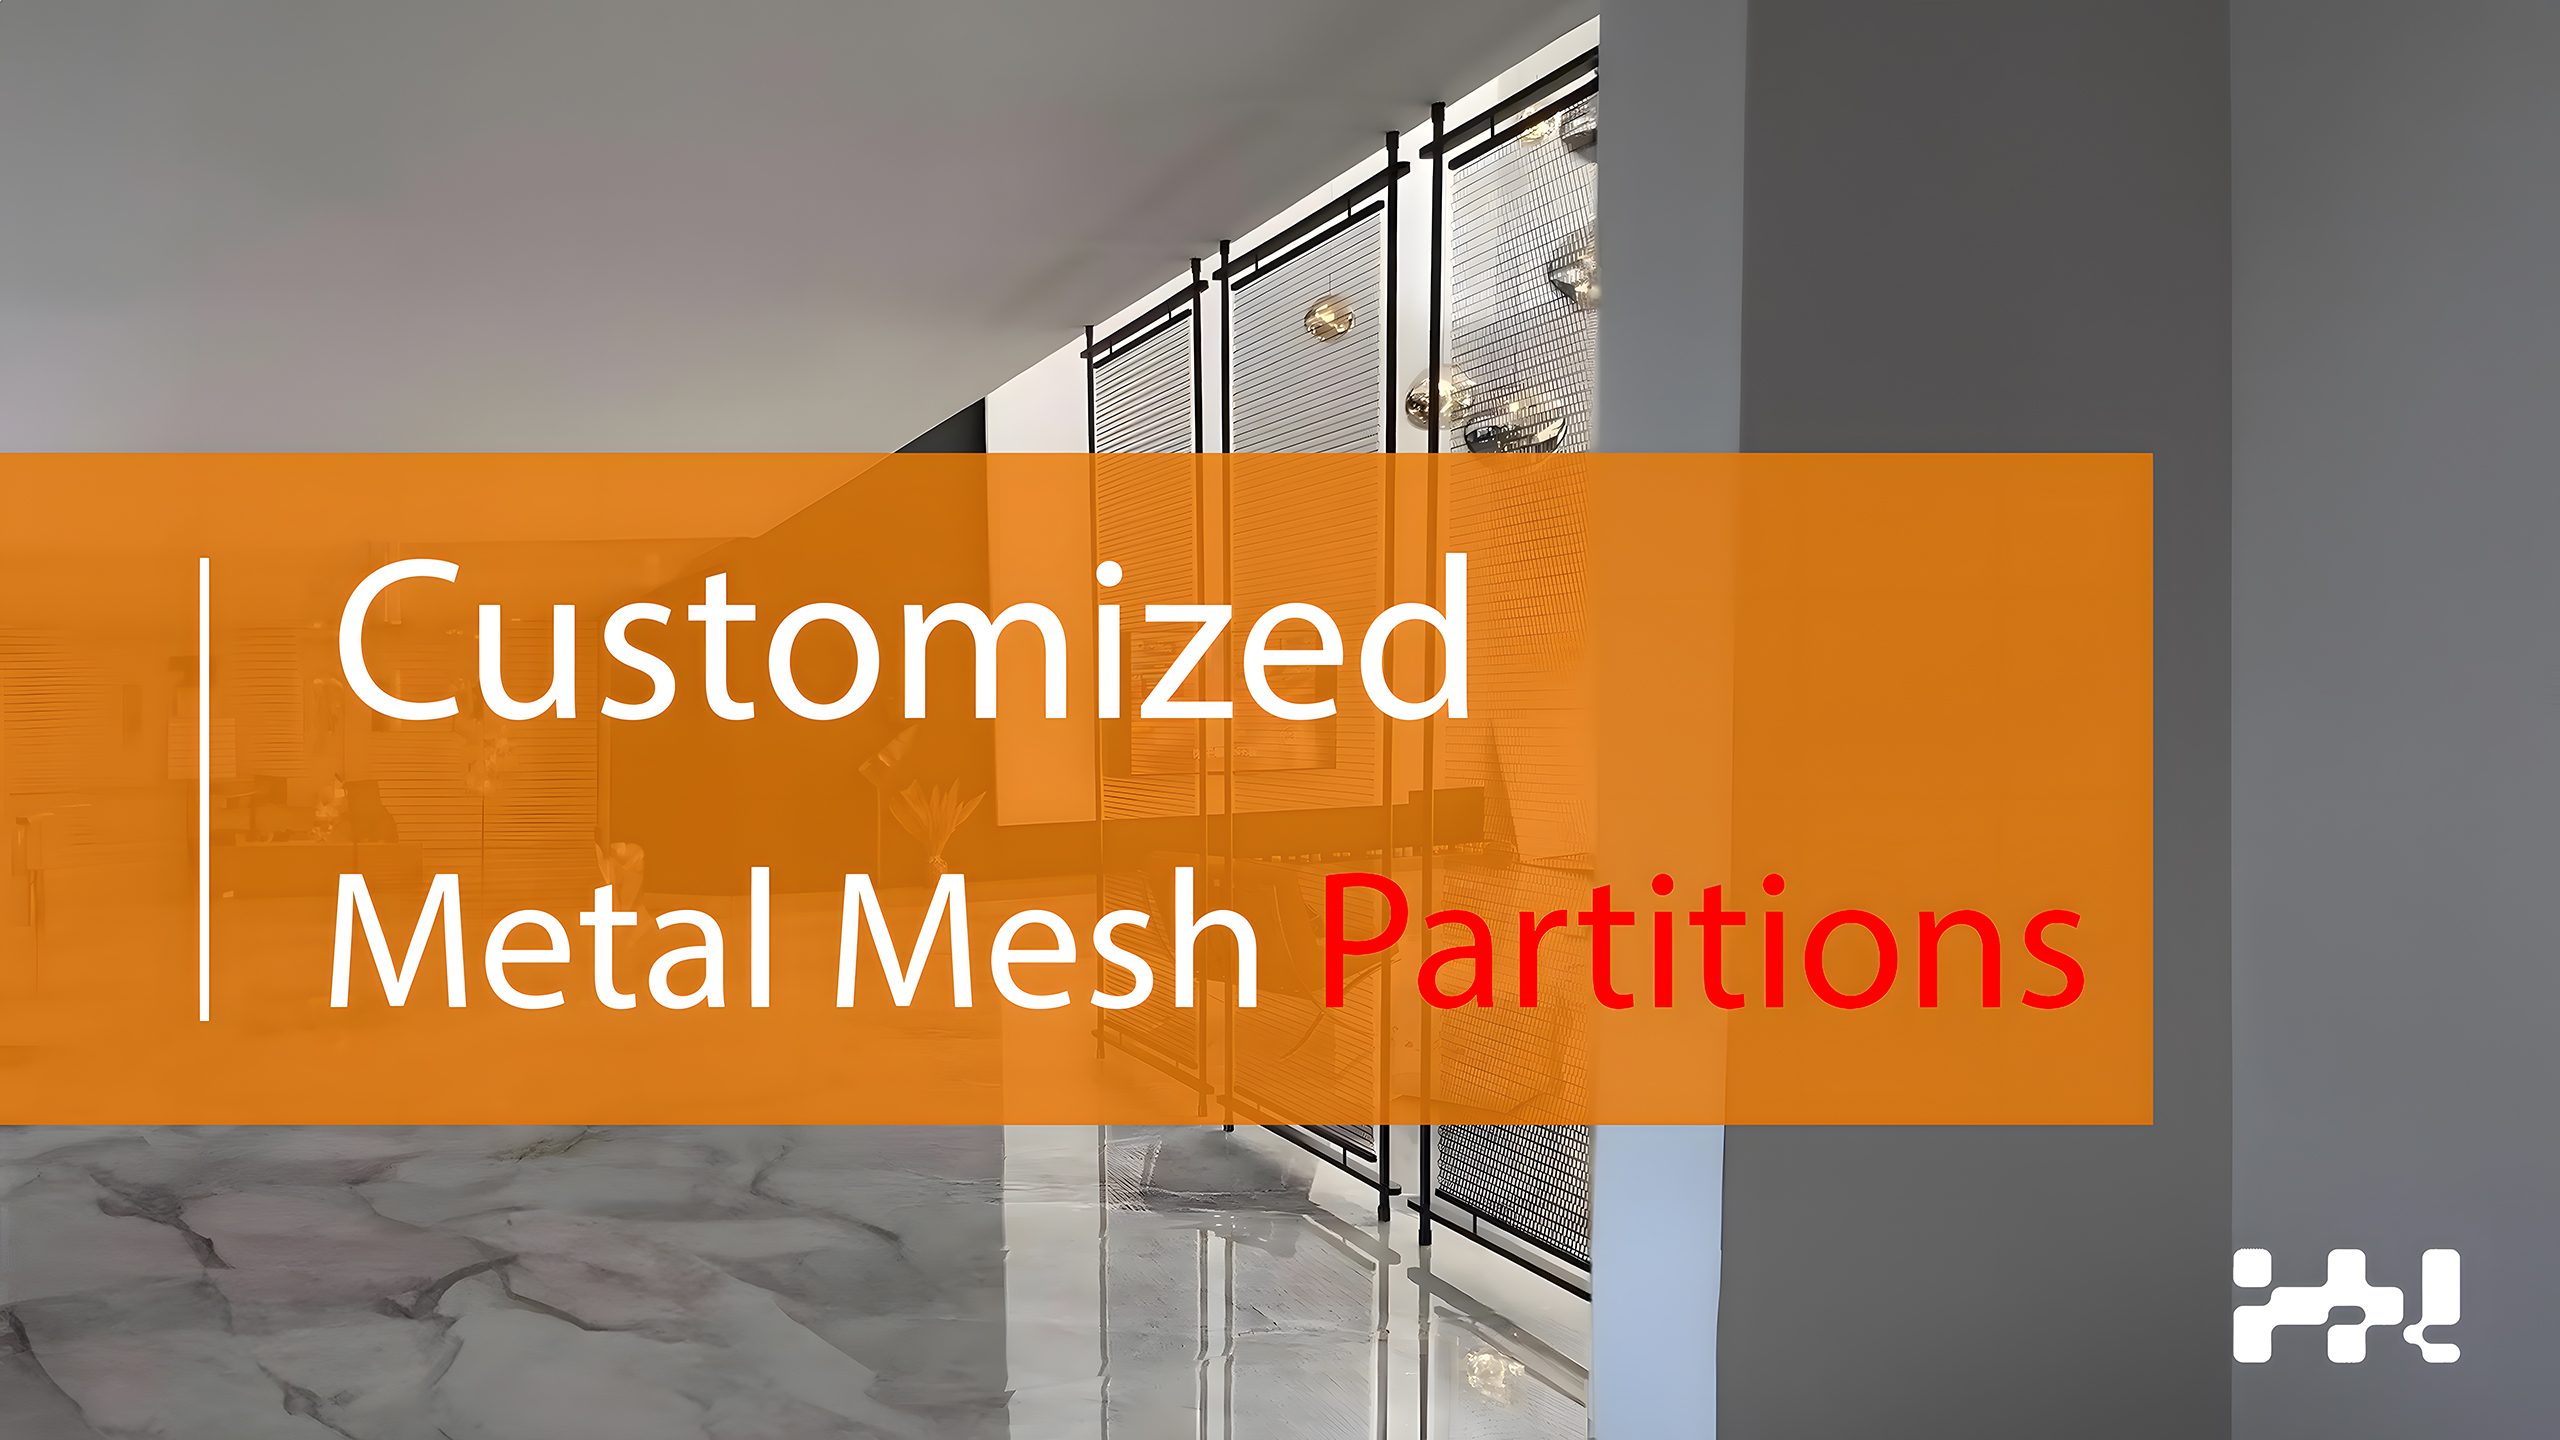 Customized Metal Mesh Partitions | On-Site Demo & Installation